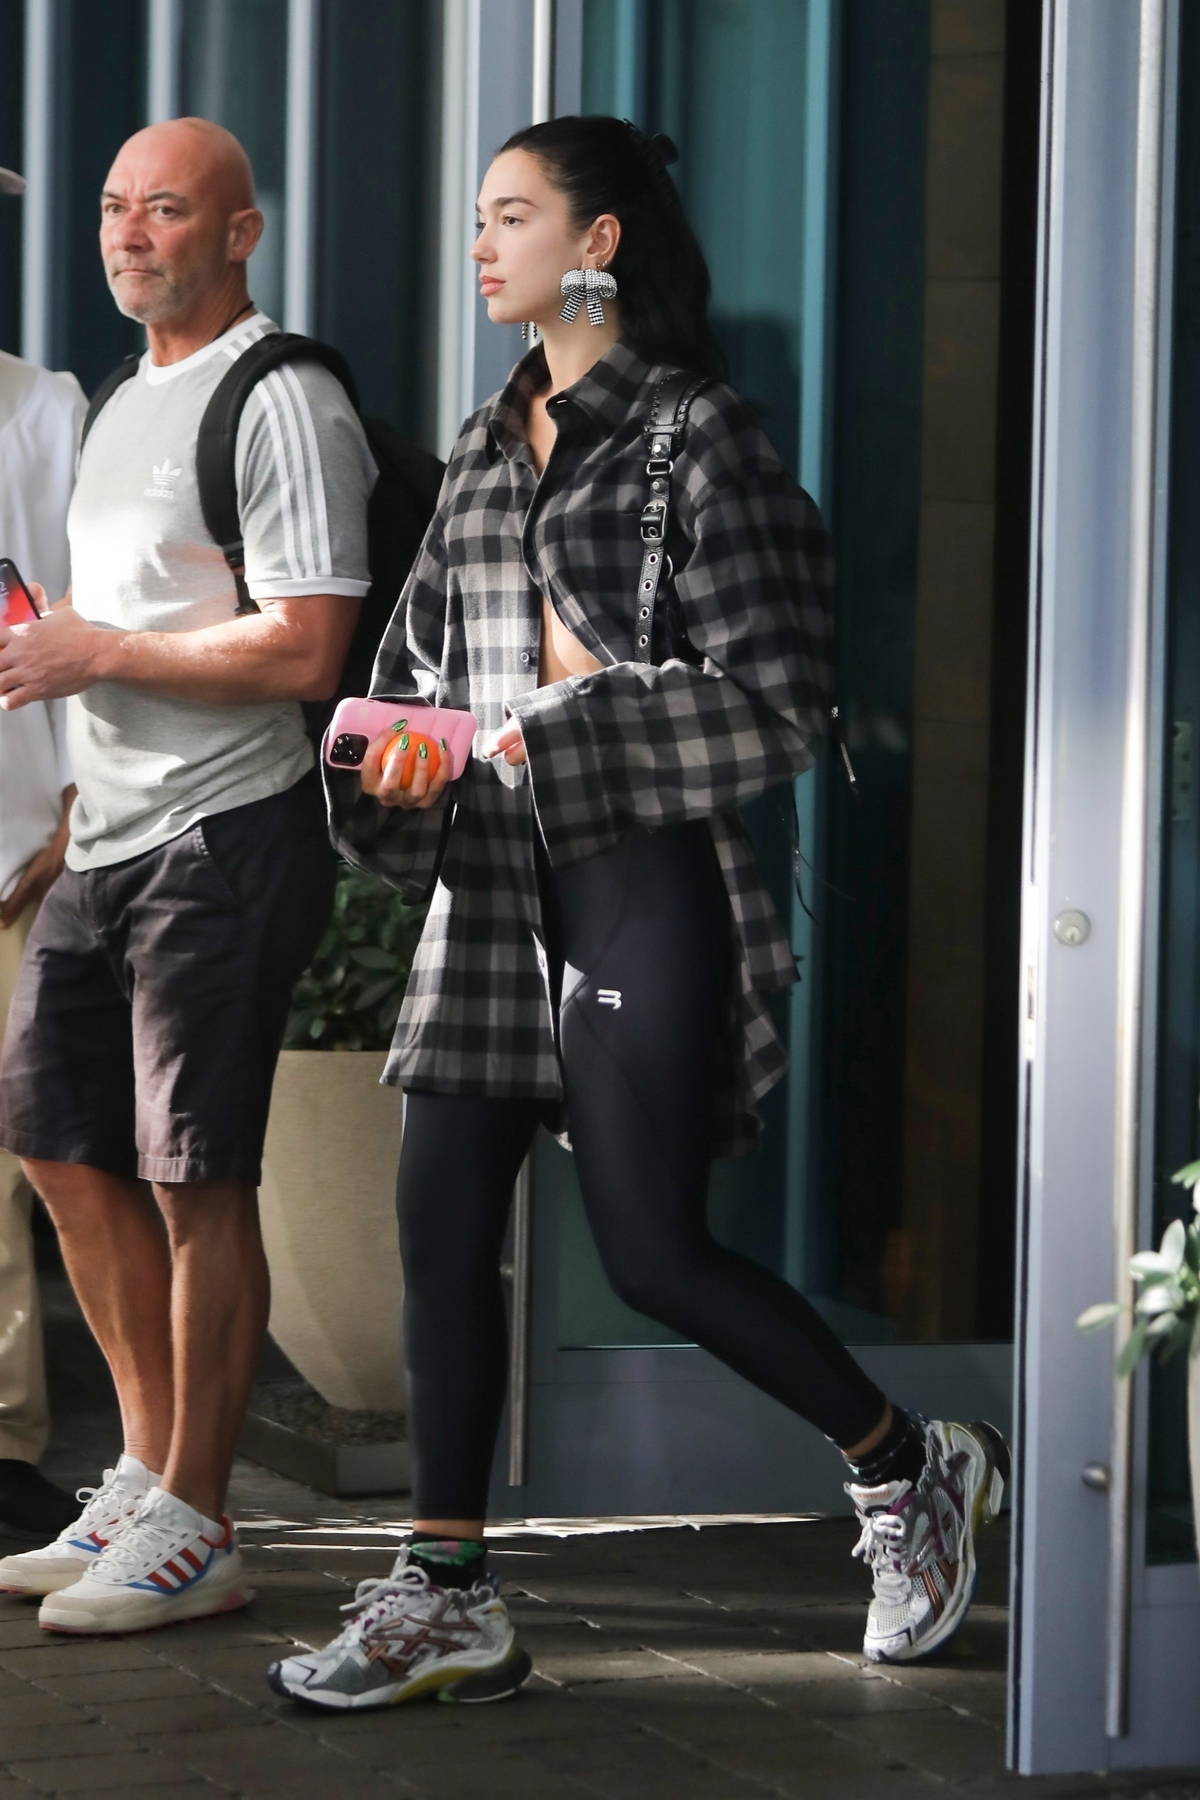 https://www.celebsfirst.com/wp-content/uploads/2022/02/dua-lipa-wears-black-and-grey-plaid-flannel-shirt-with-black-leggings-while-heading-out-of-the-setai-hotel-in-miami-beach-florida-080222_2.jpg